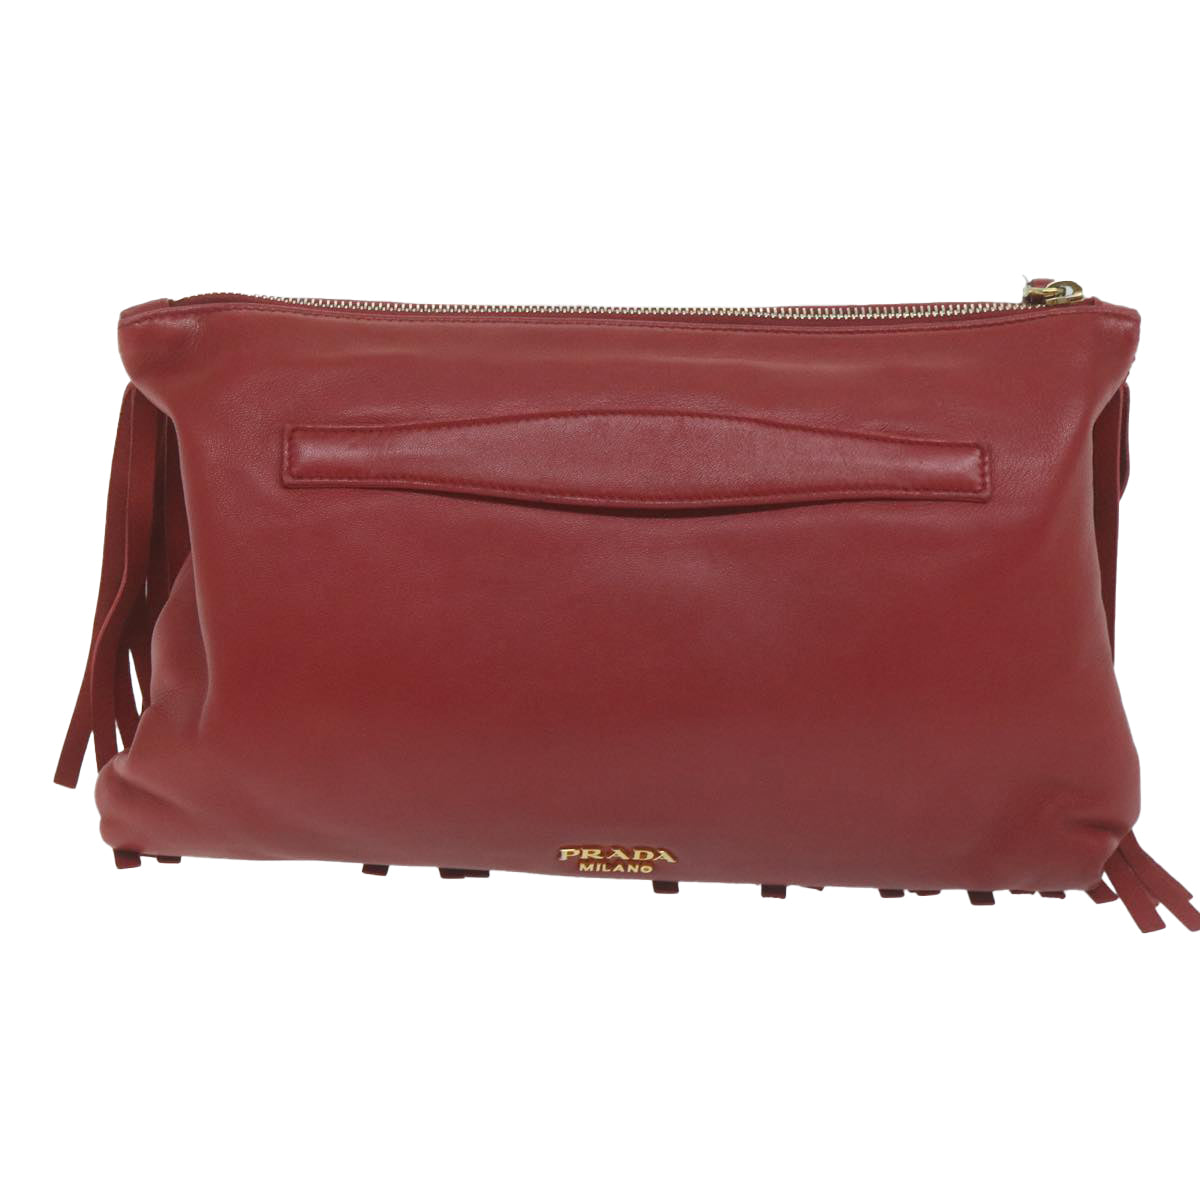 PRADA Clutch Bag Leather Red Auth bs11809 - 0